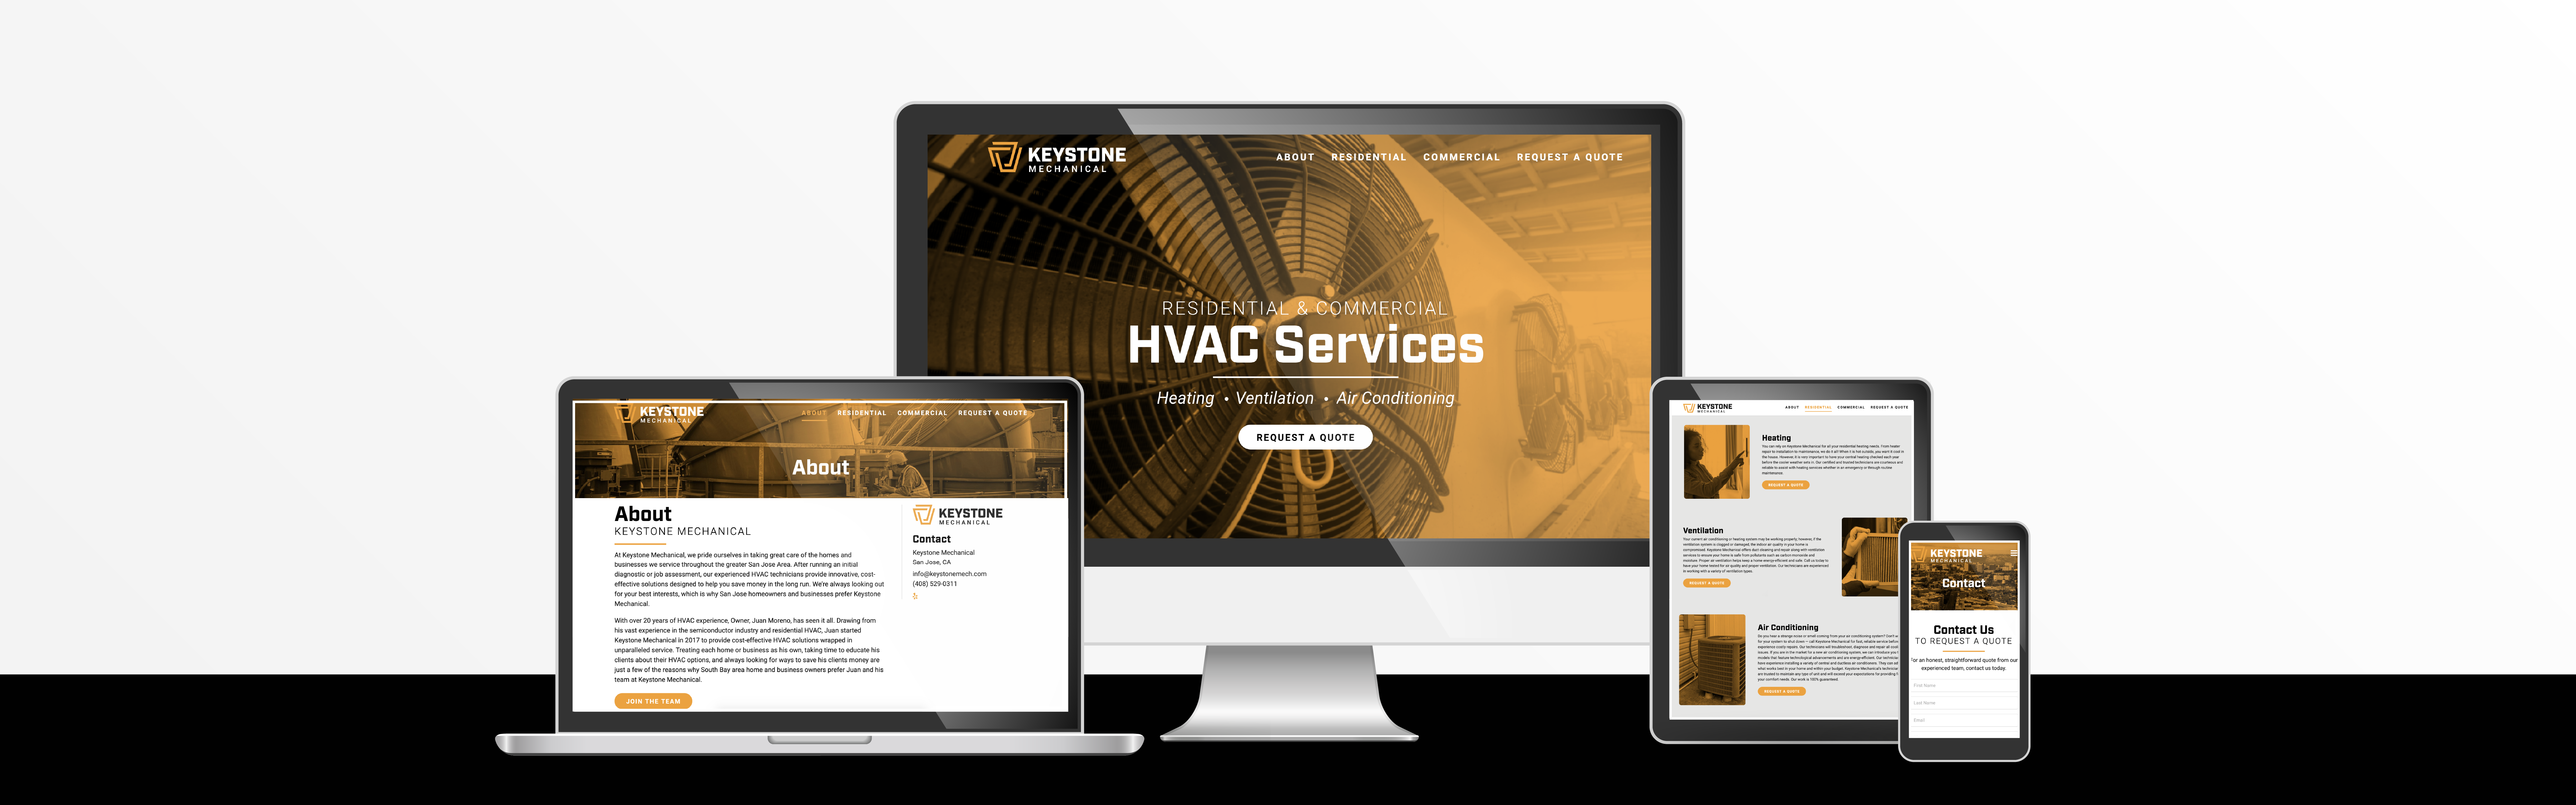 Responsive website design displayed across multiple devices, showcasing Keystone Mechanical's online presence as a hvac services company.